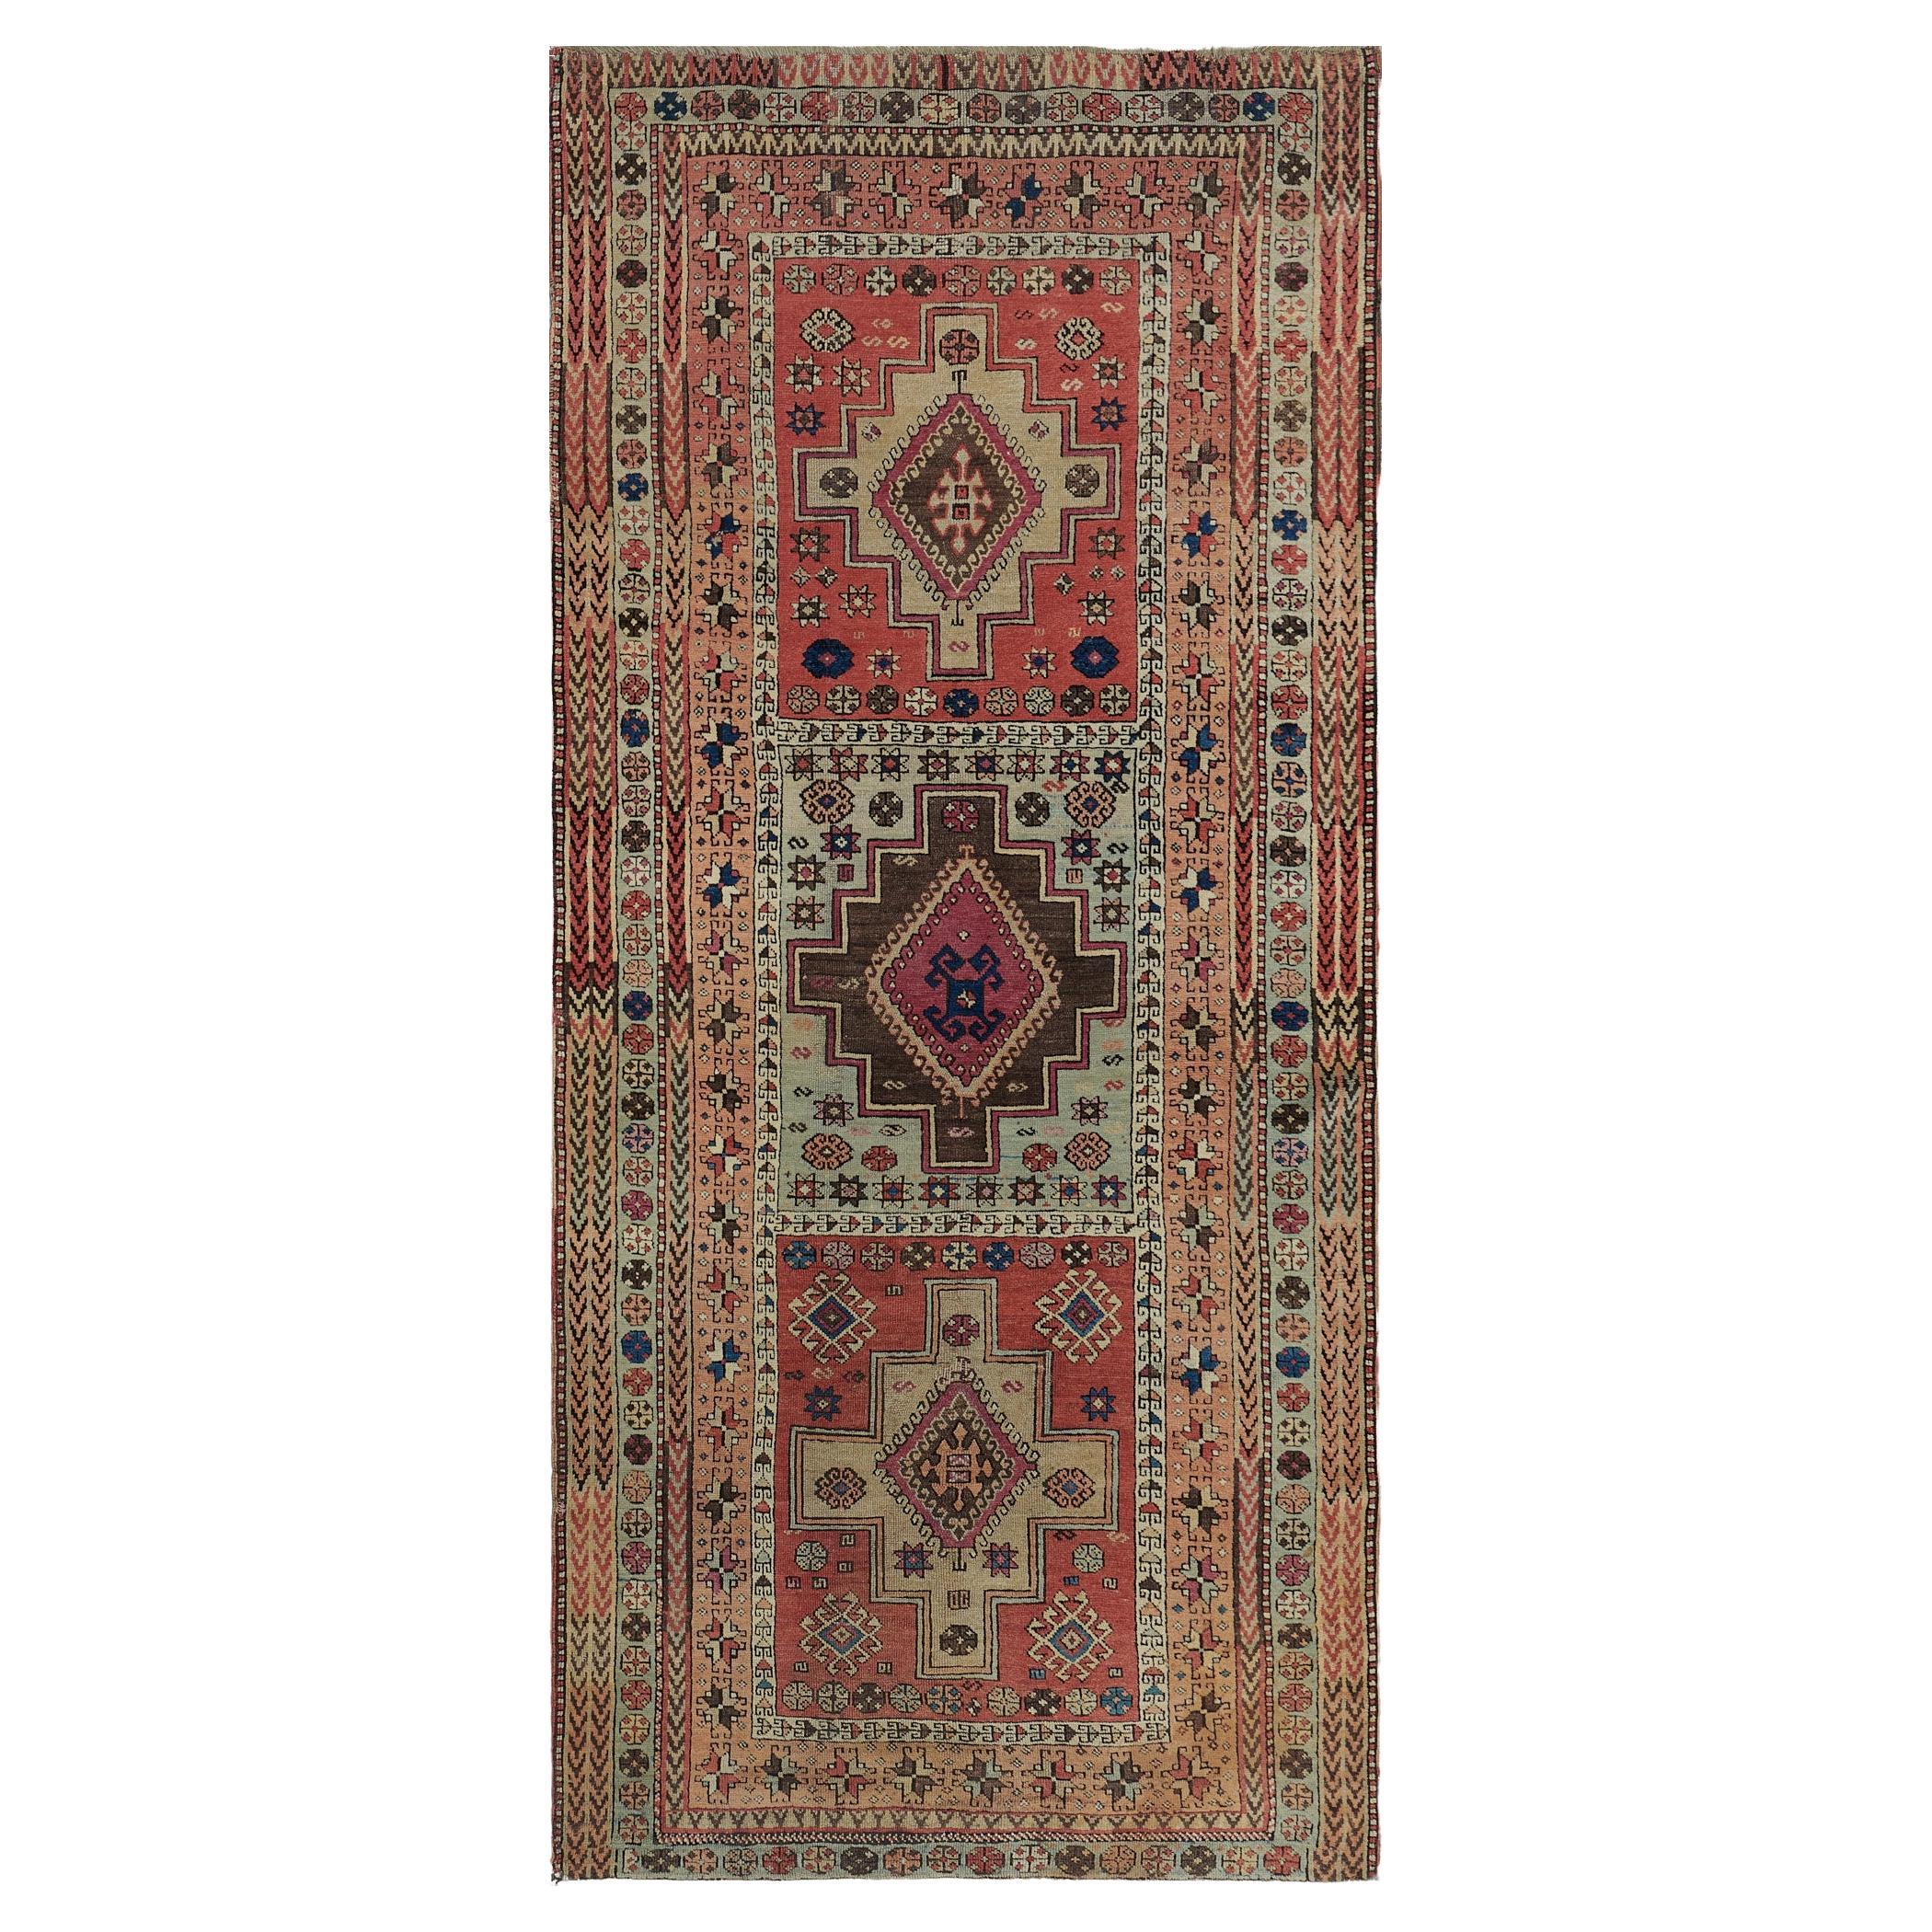 Antique Hand-Knotted Wool Traditional Karabagh Runner, c. 1880 For Sale